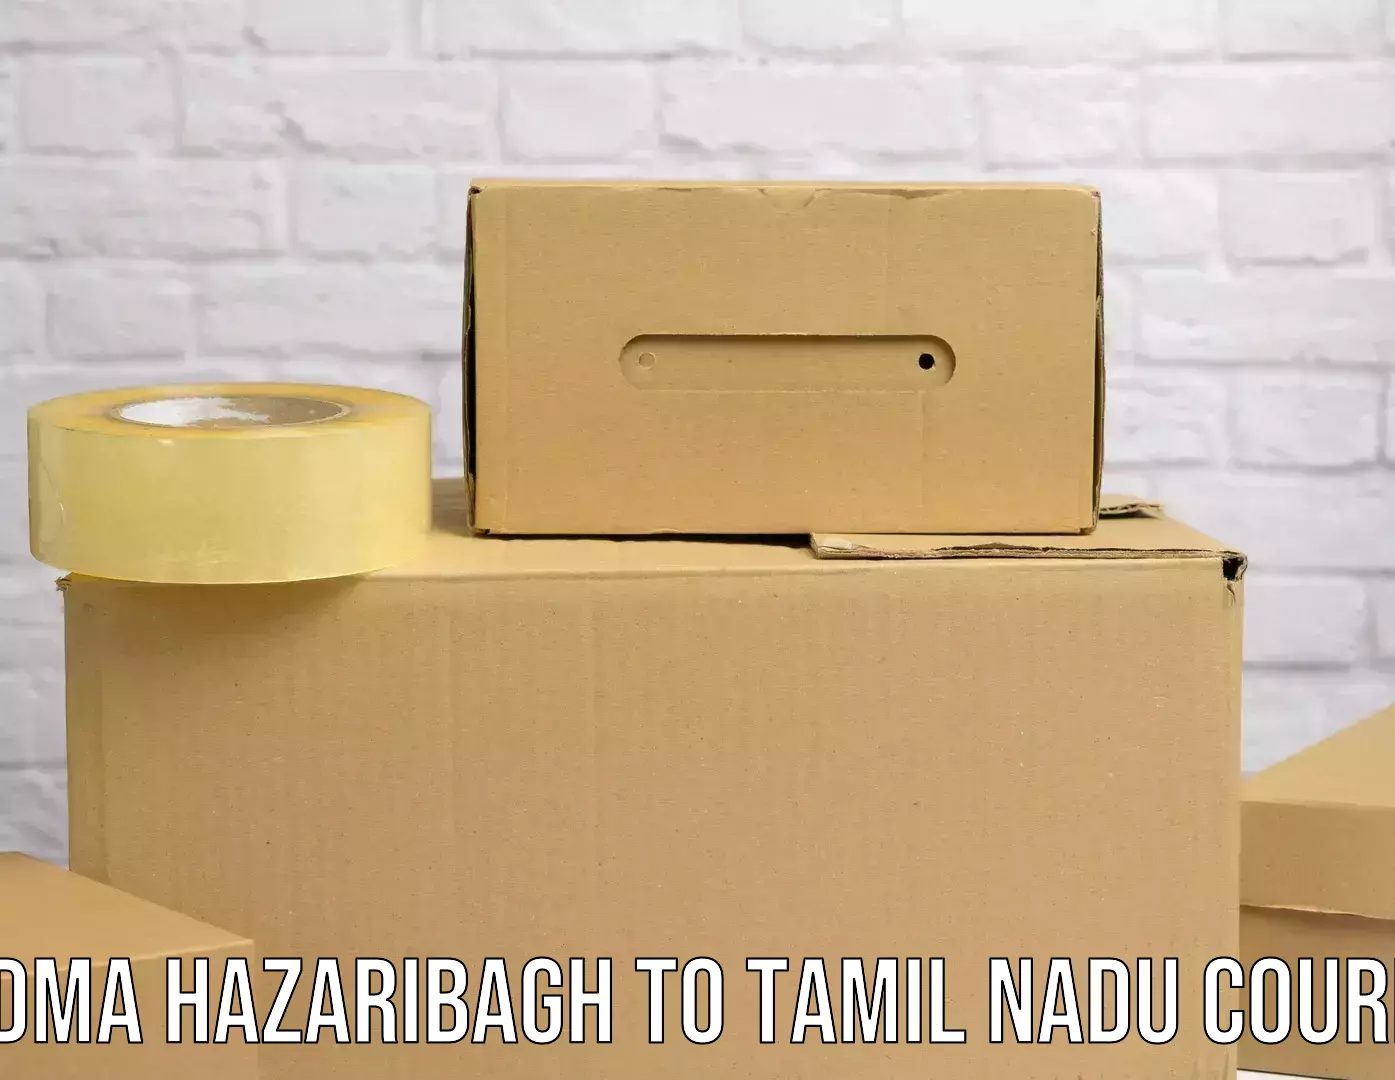 Flexible delivery schedules Padma Hazaribagh to Chennai